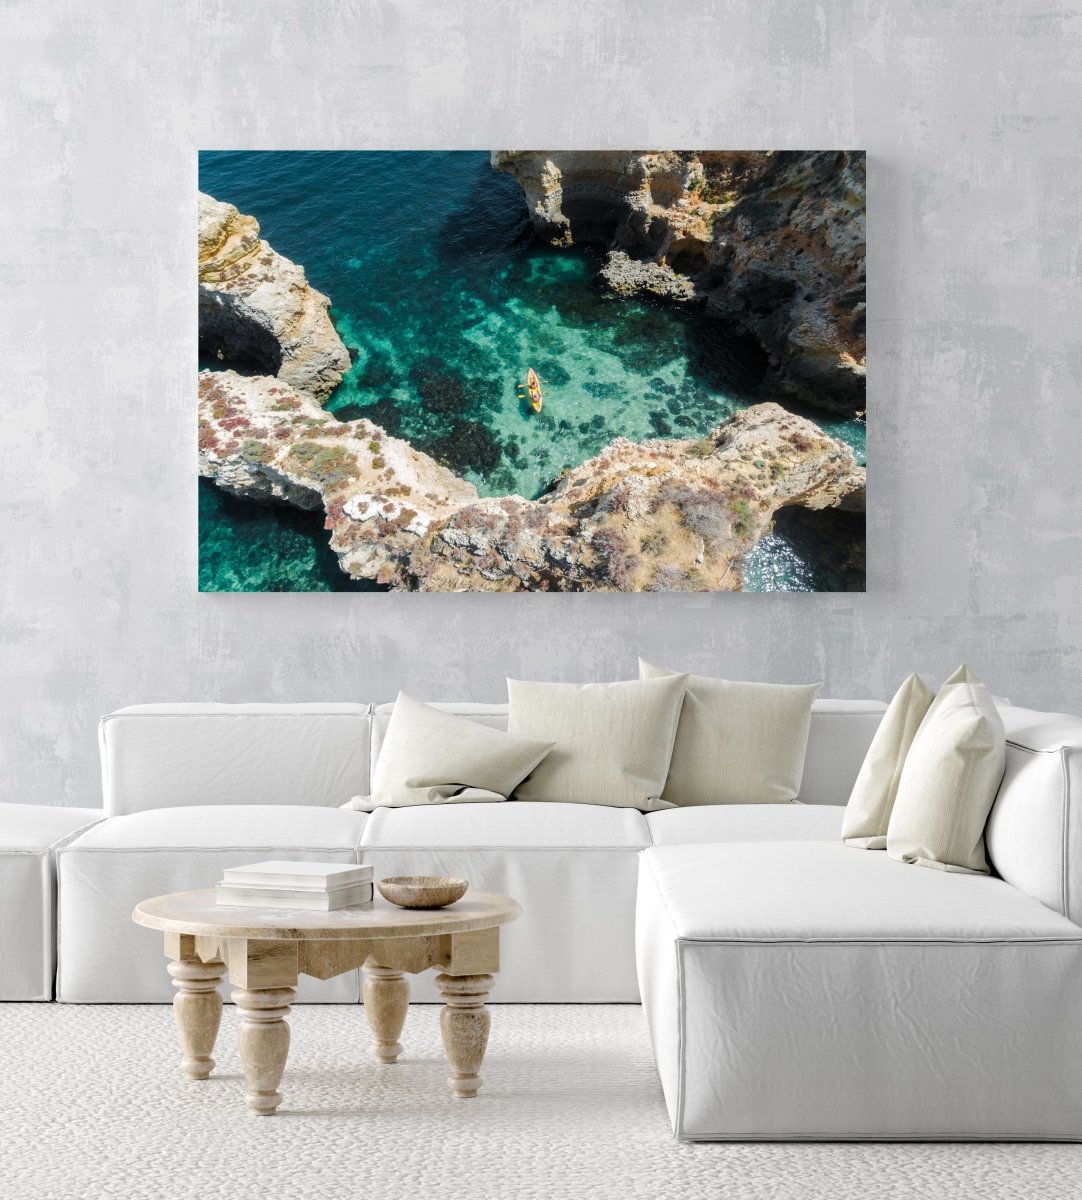 Aerial of two people paddling yellow kayak near Lagos caves in ocean in an acrylic/perspex frame